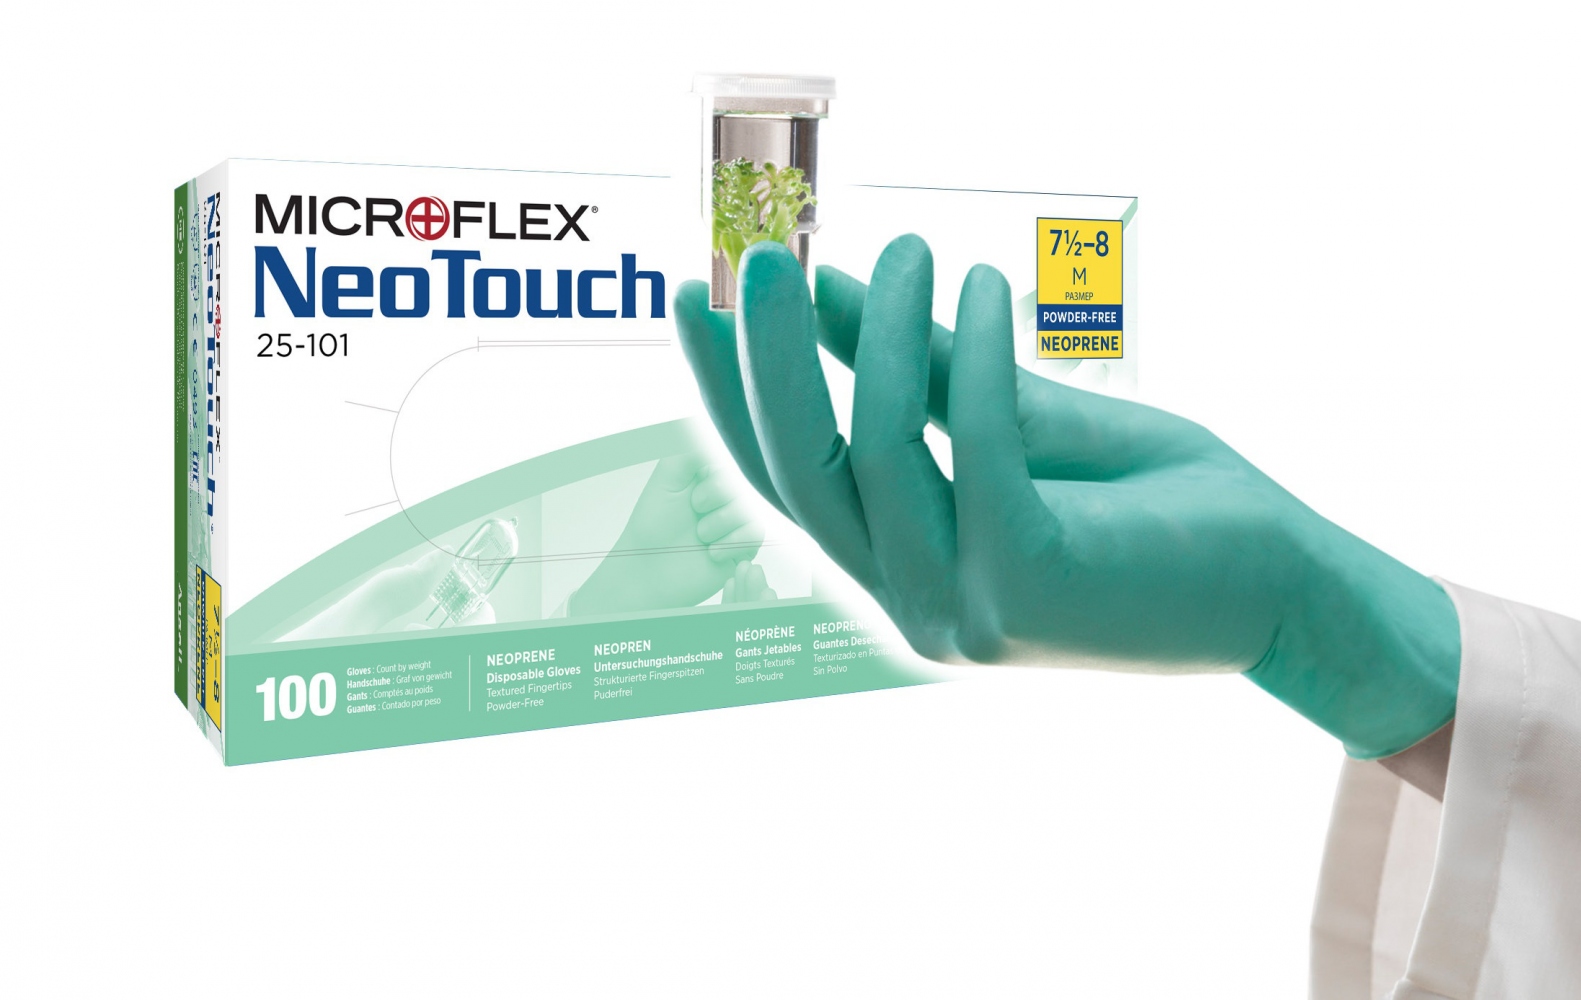 pics/Ansell/ansell-microflex-25-101-neotouch-neoprene-chemical-resistance-gloves-green.jpg